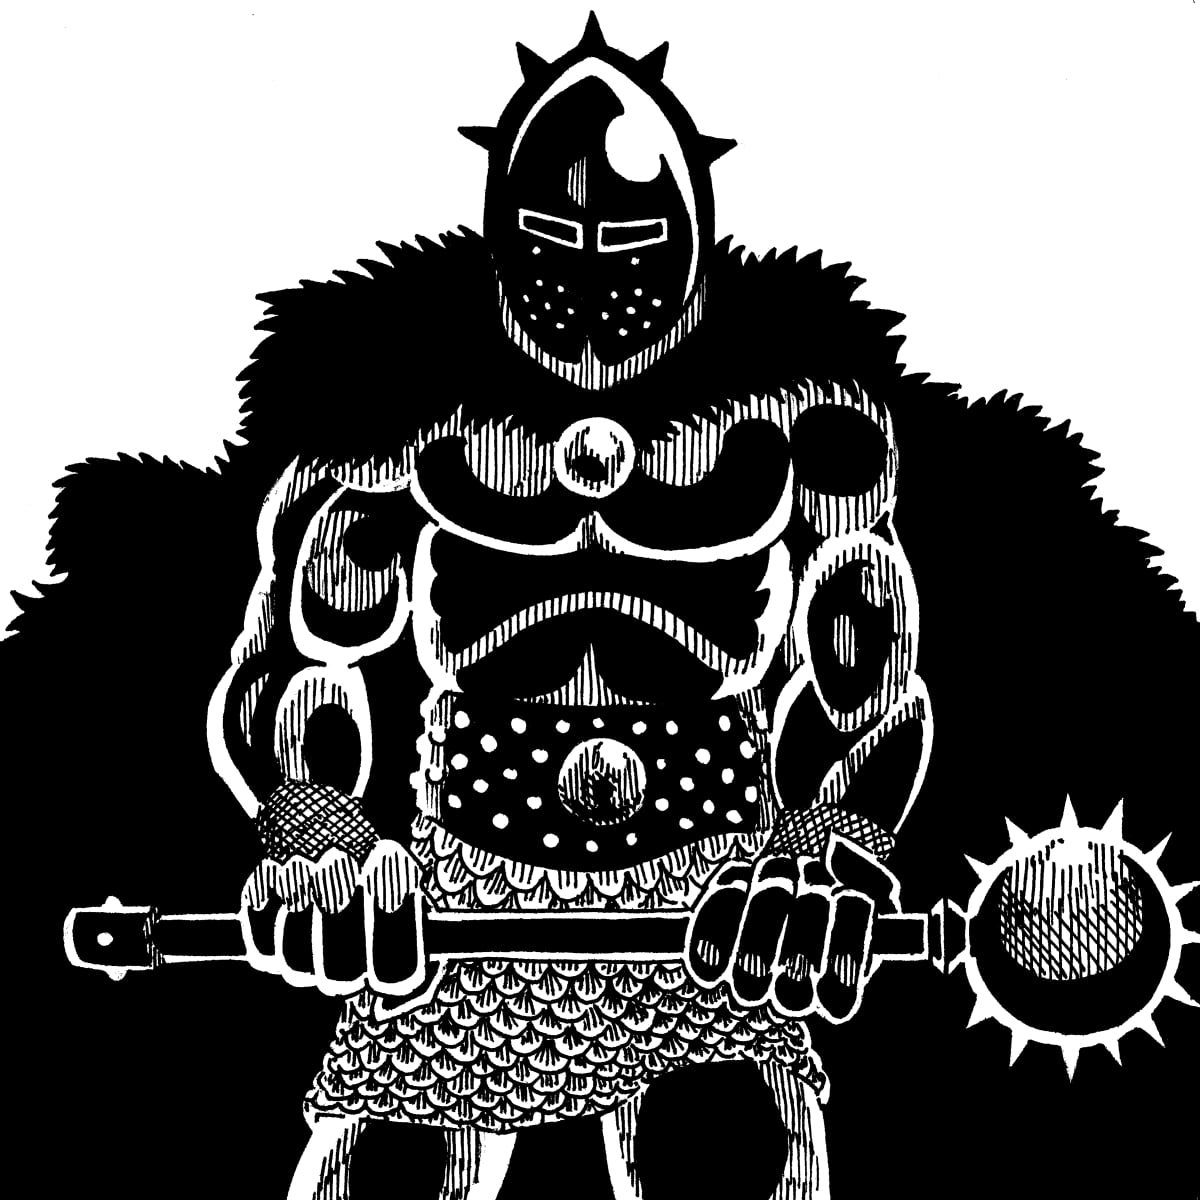 Origin/Inspiration/Meaning of Dark Lord Armor and fortress design